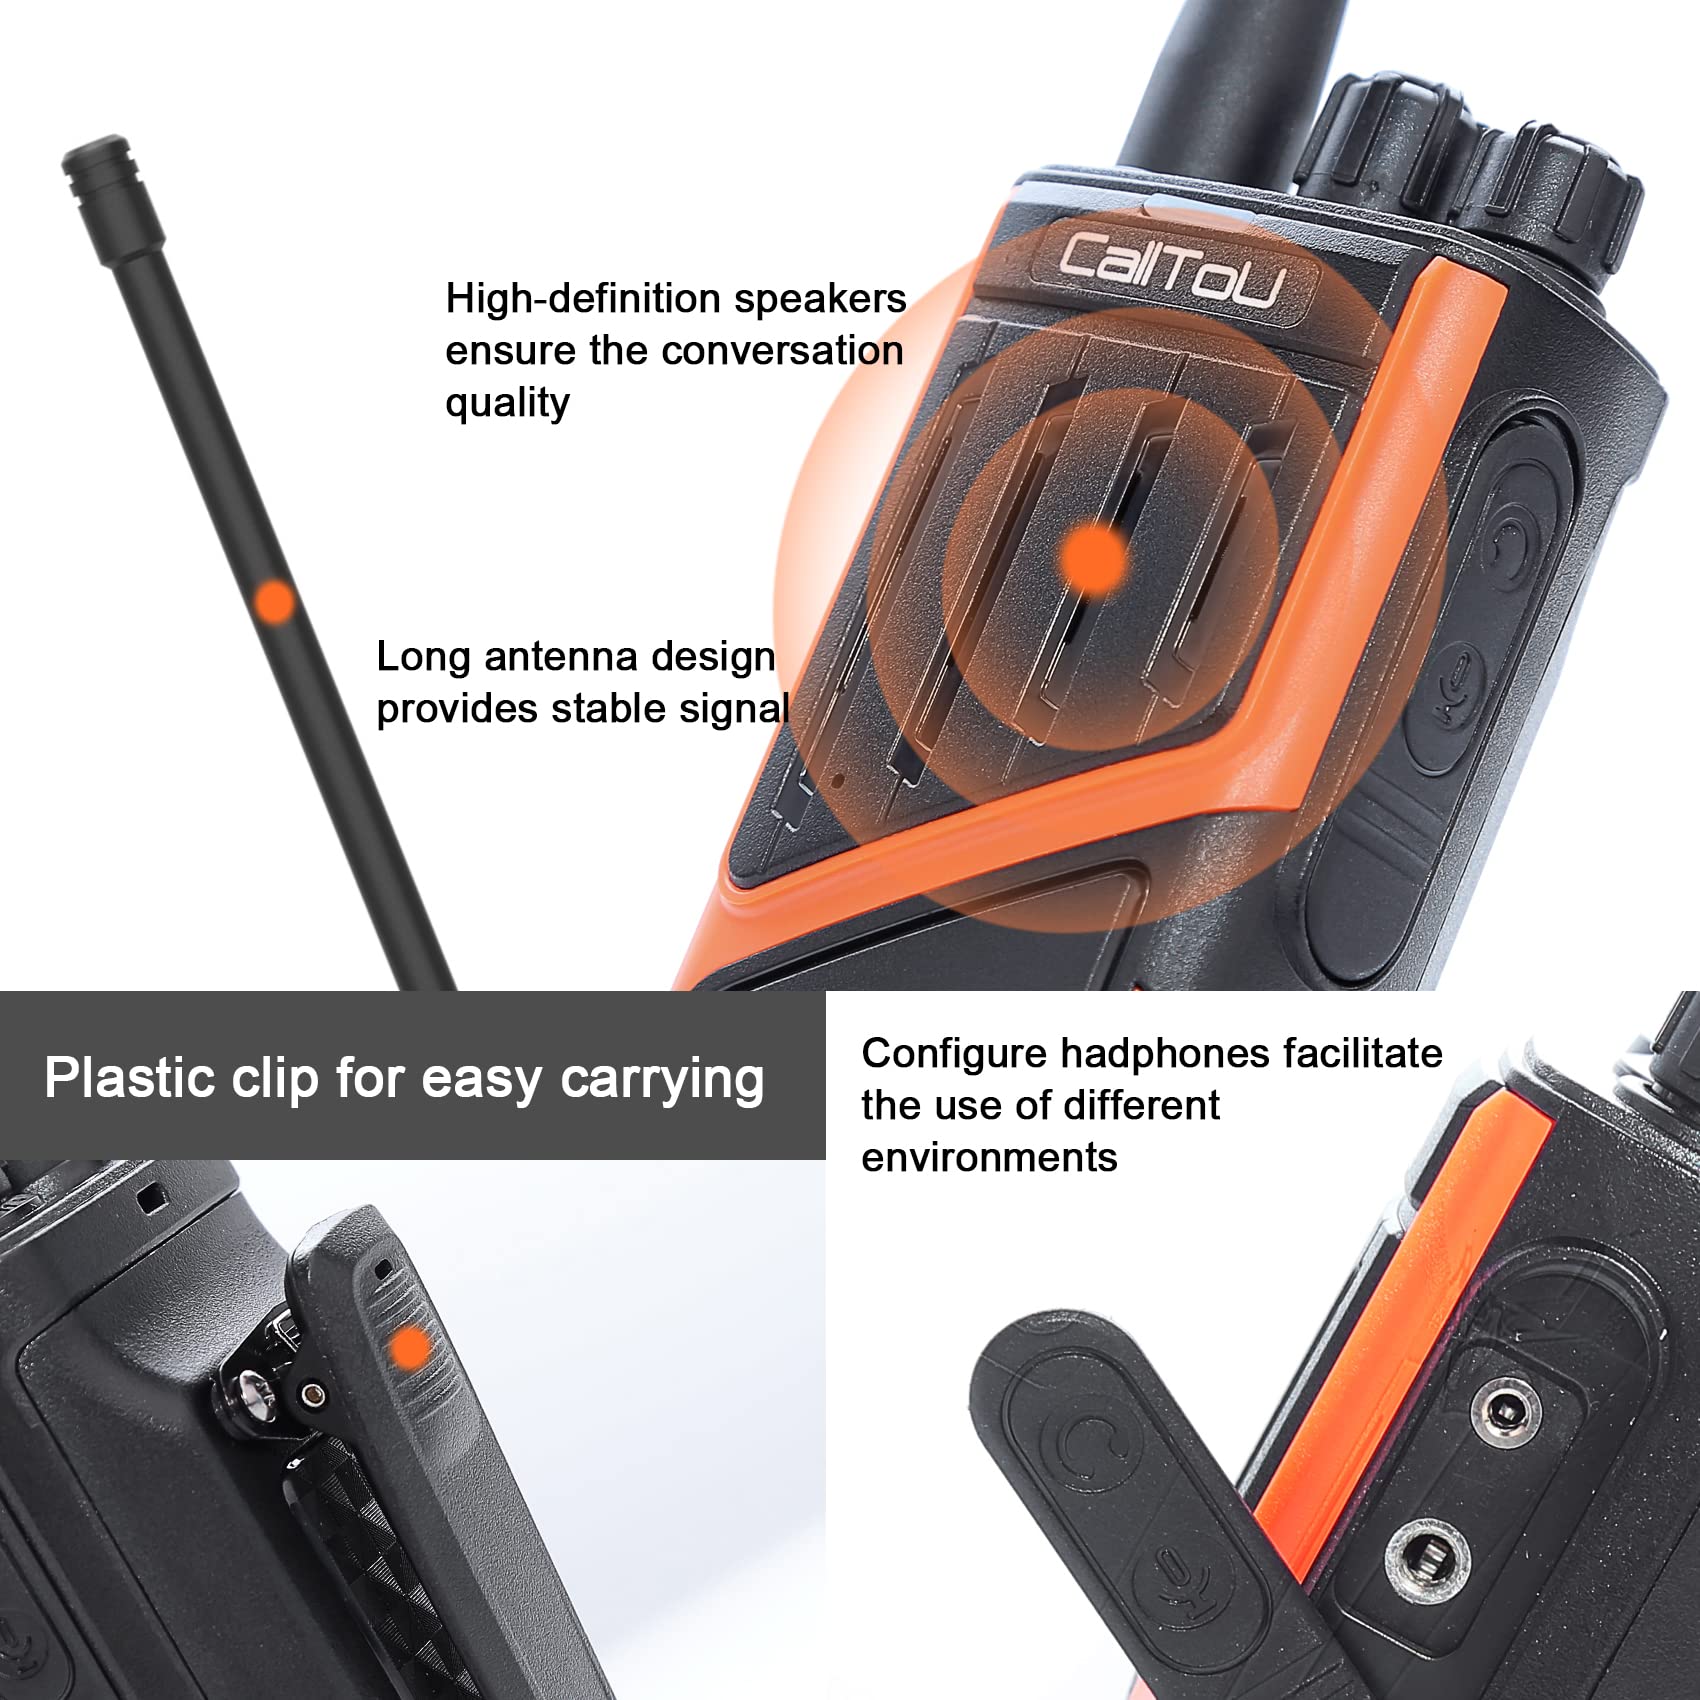 How to Connect Long Range Walkie Talkies with Other Devices